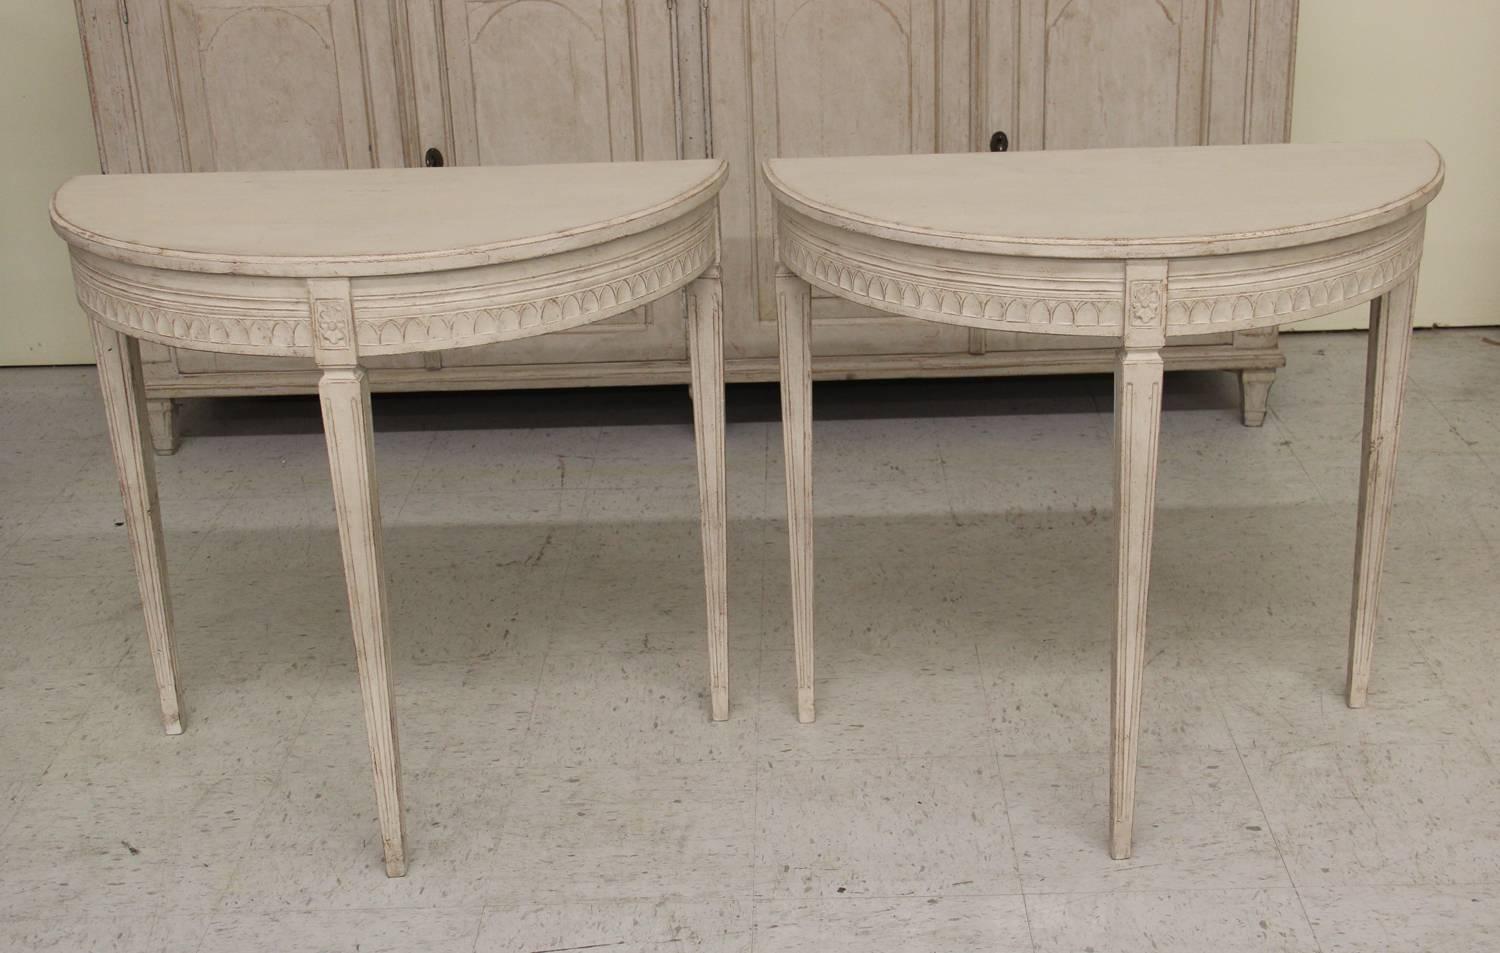 A pair of Swedish Gustavian style small demilune console tables from the 19th century. The tables feature carved rosettes with lamb's tongue carving on the apron; raised on square, tapered and fluted legs.